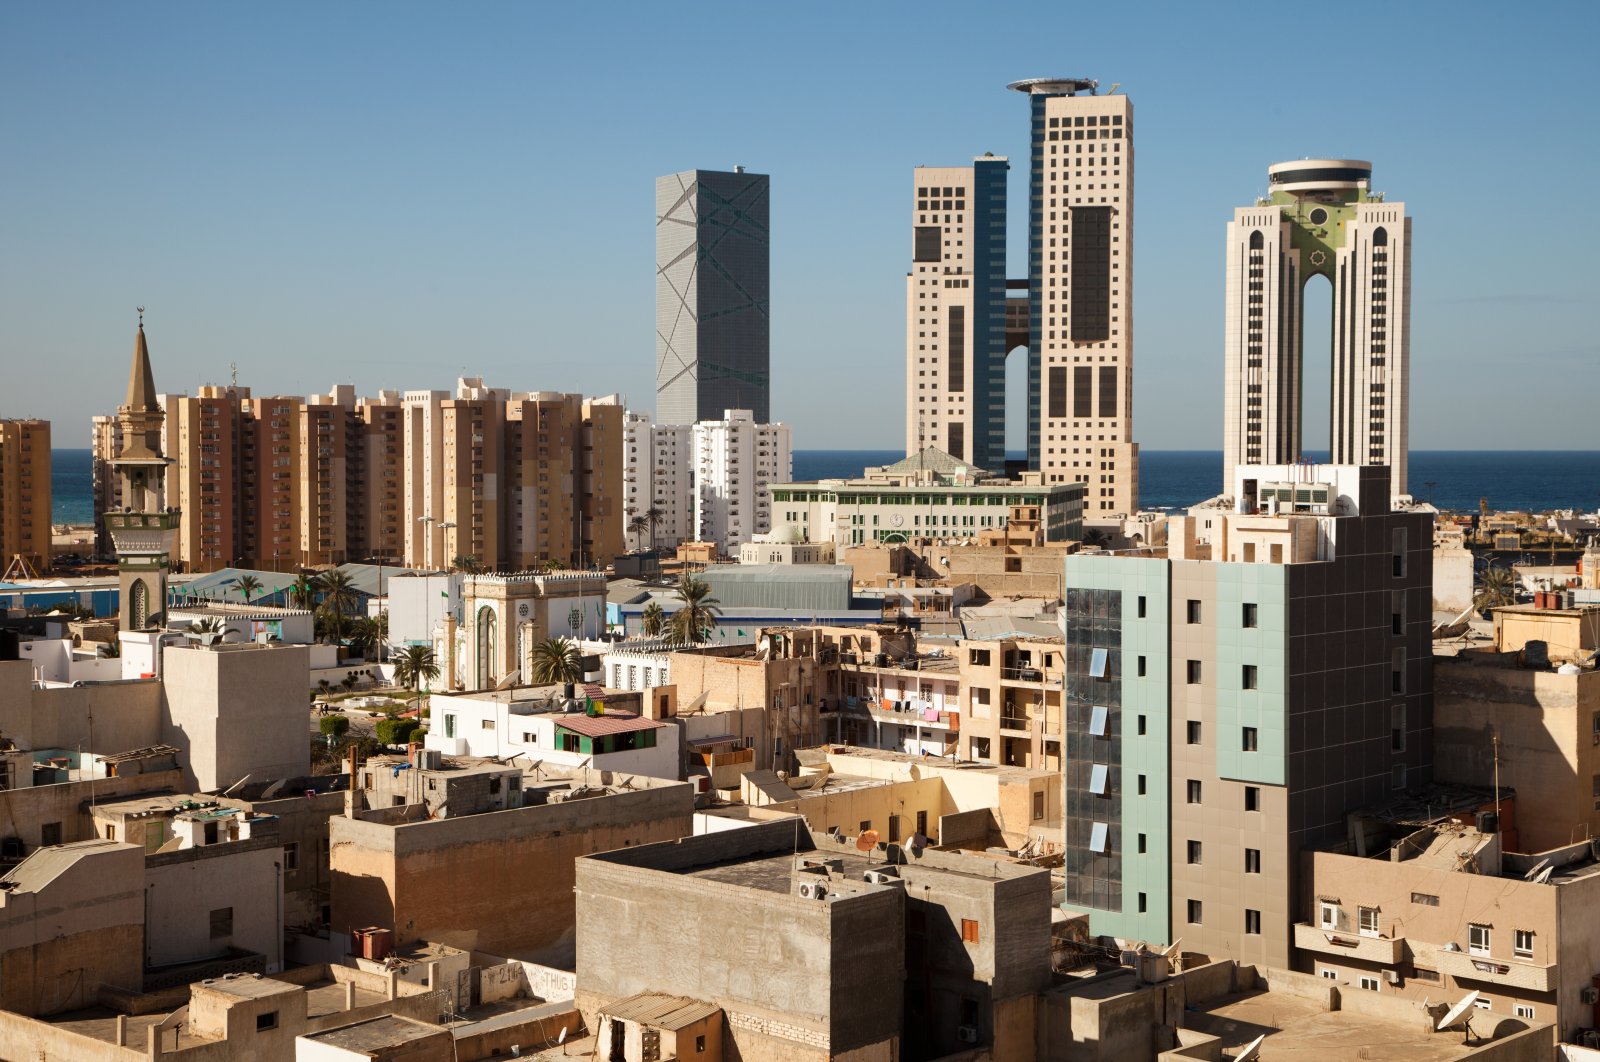 Skyline view of the Libyan capital Tripoli. (Getty Images)